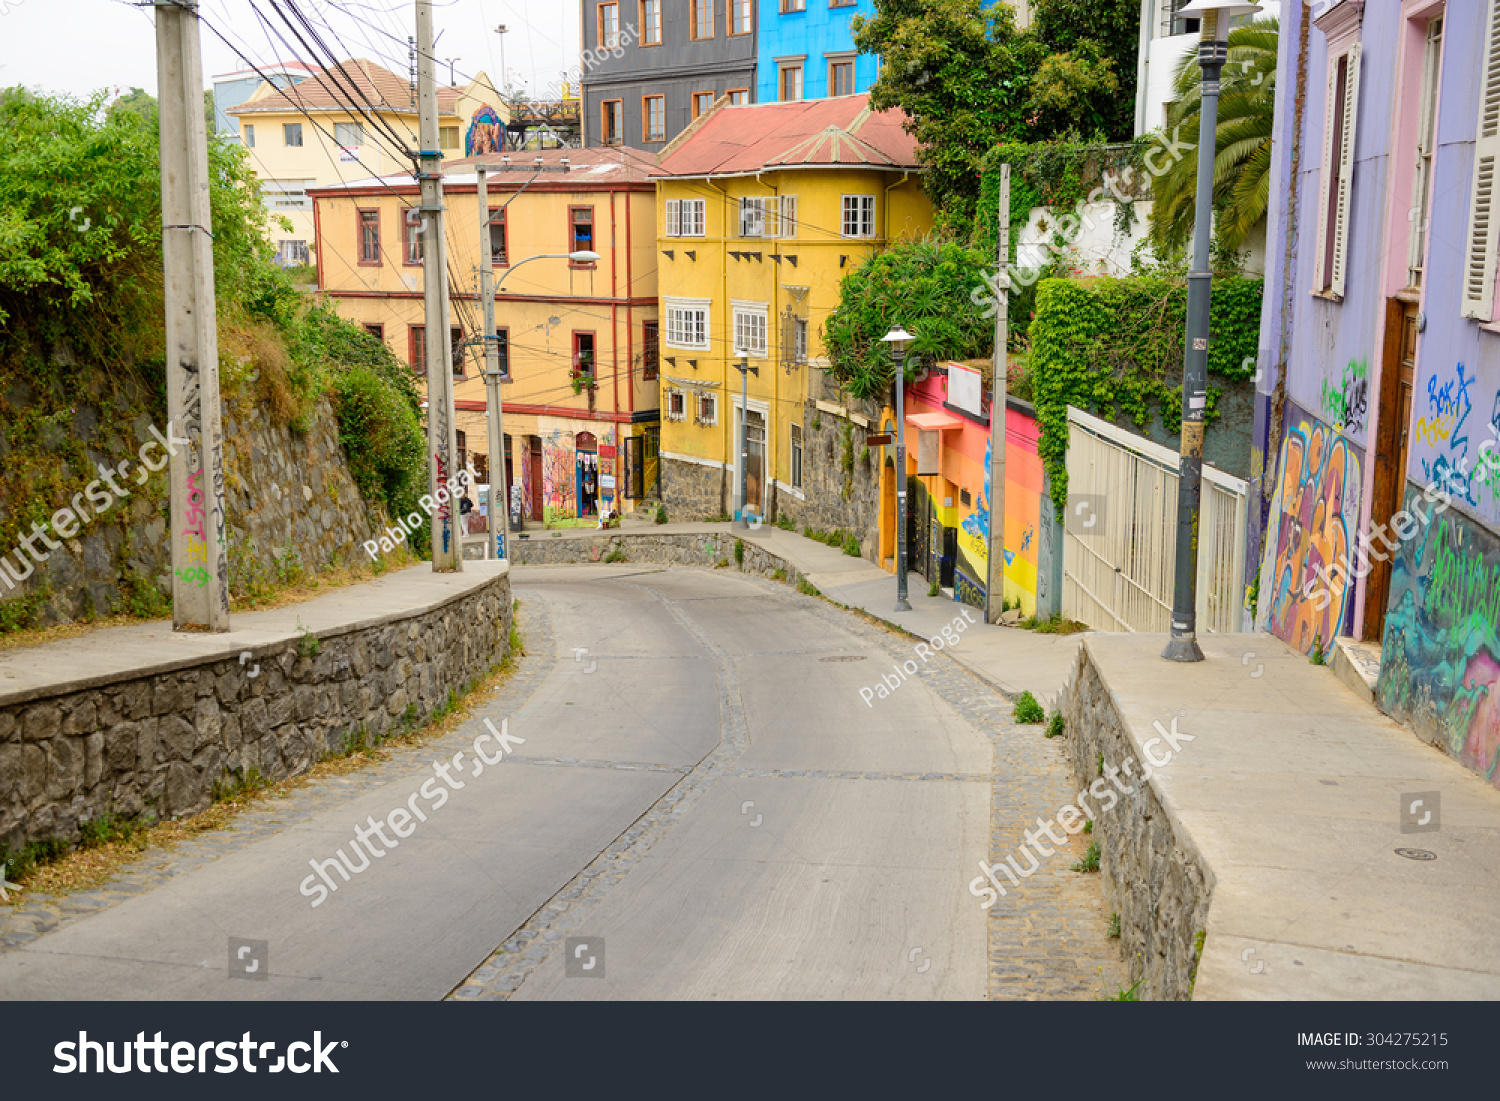 The streets of Valparaiso, Chile #304275215